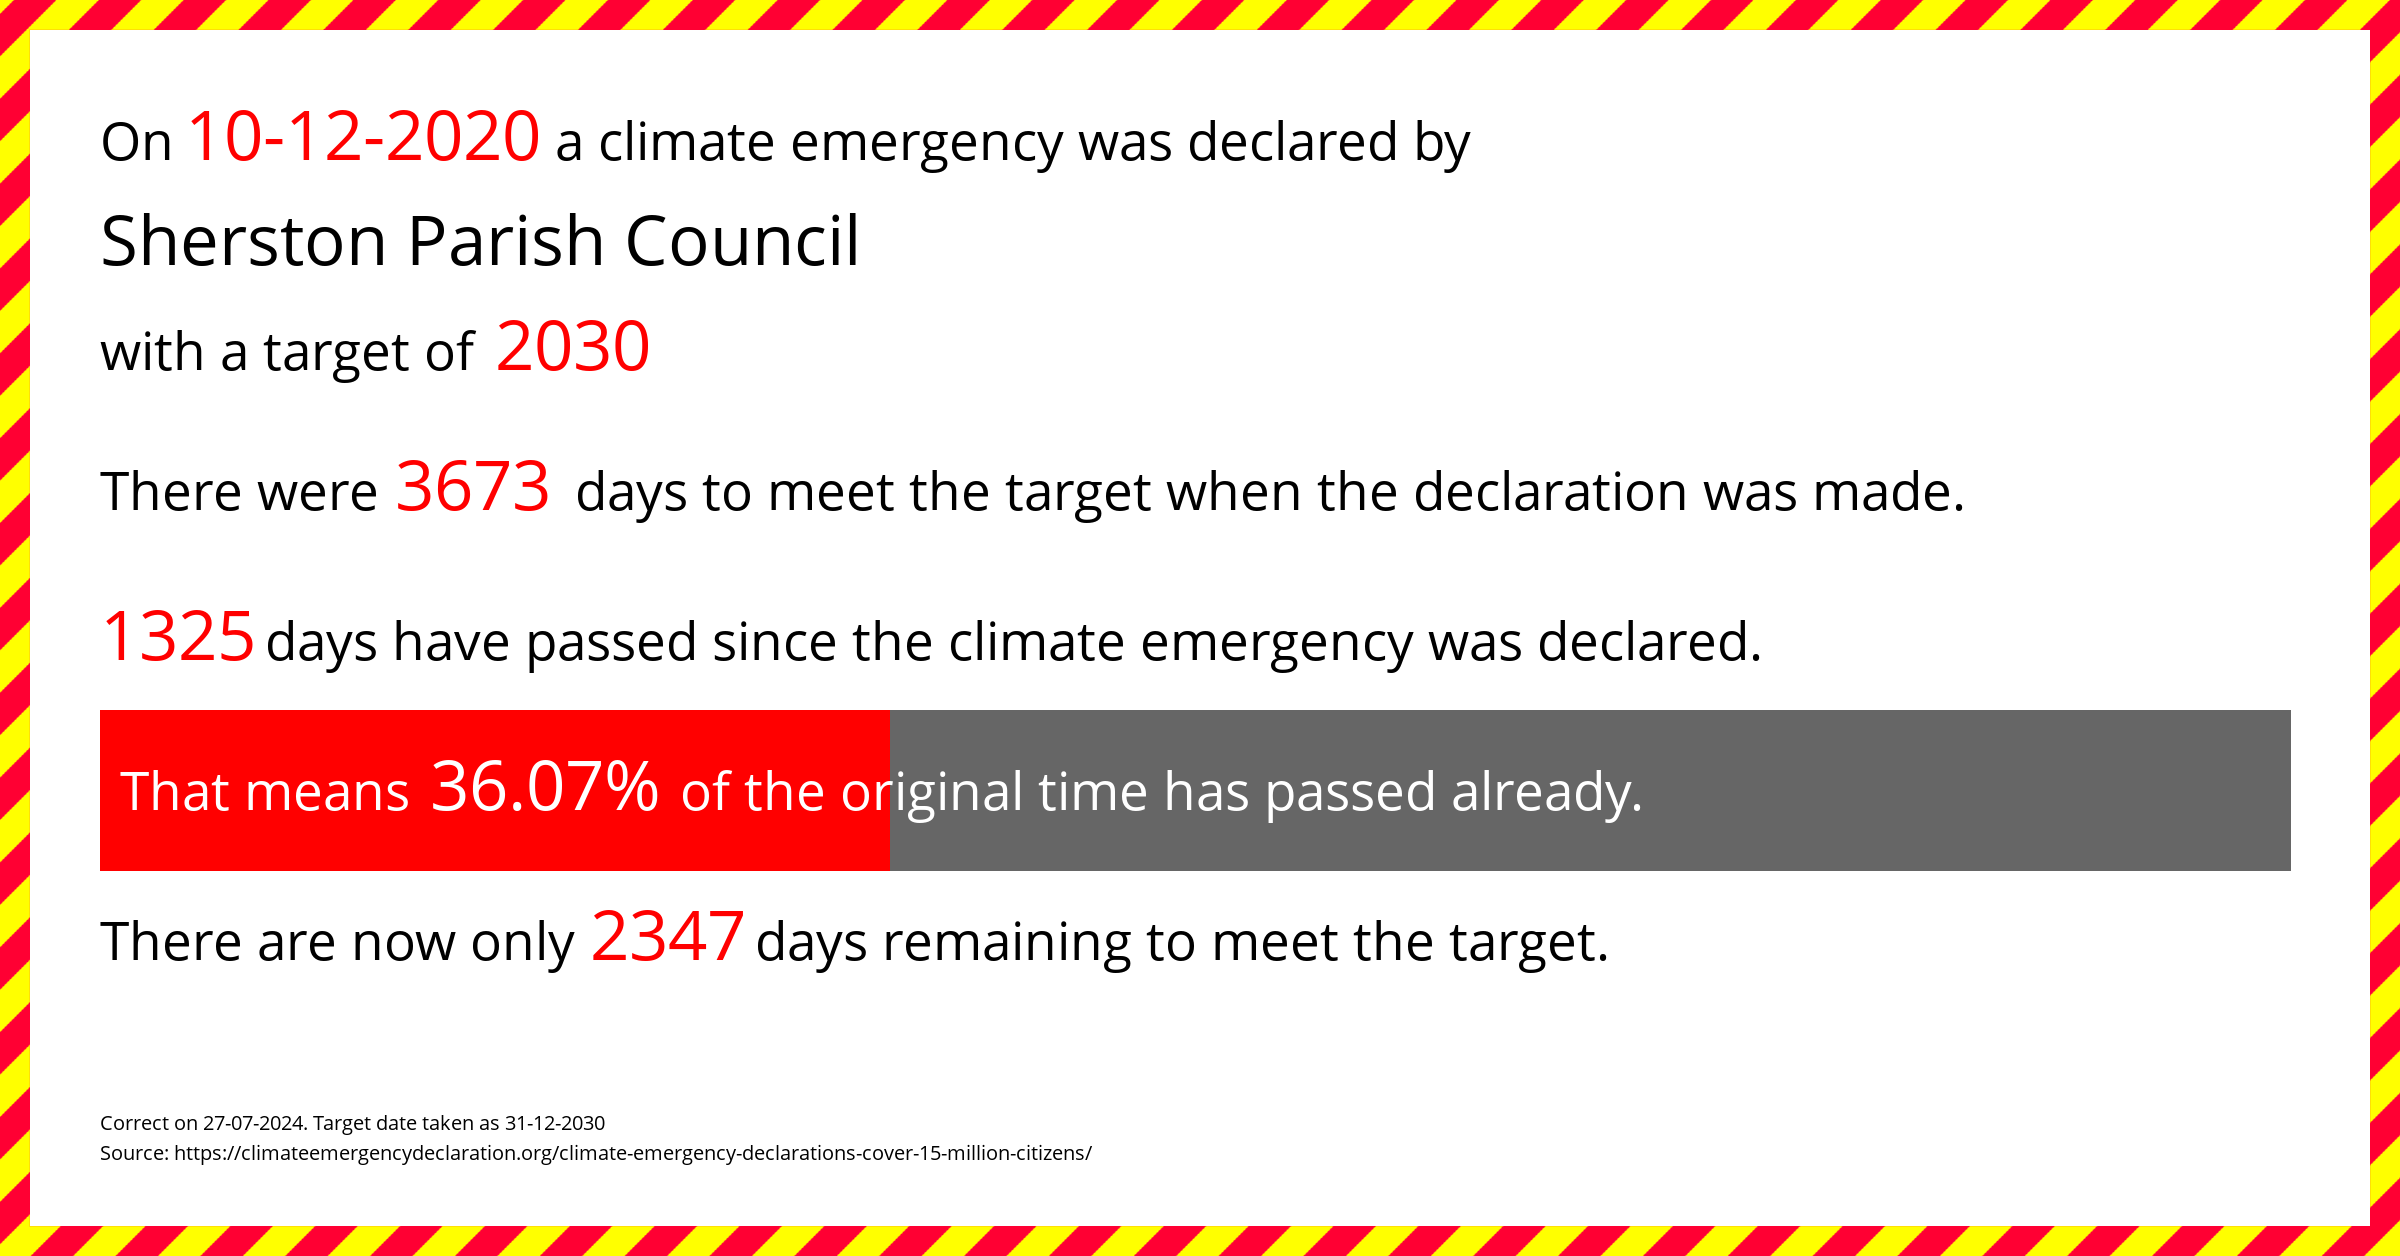 Sherston Parish Council  declared a Climate emergency on Thursday 10th December 2020, with a target of 2030.